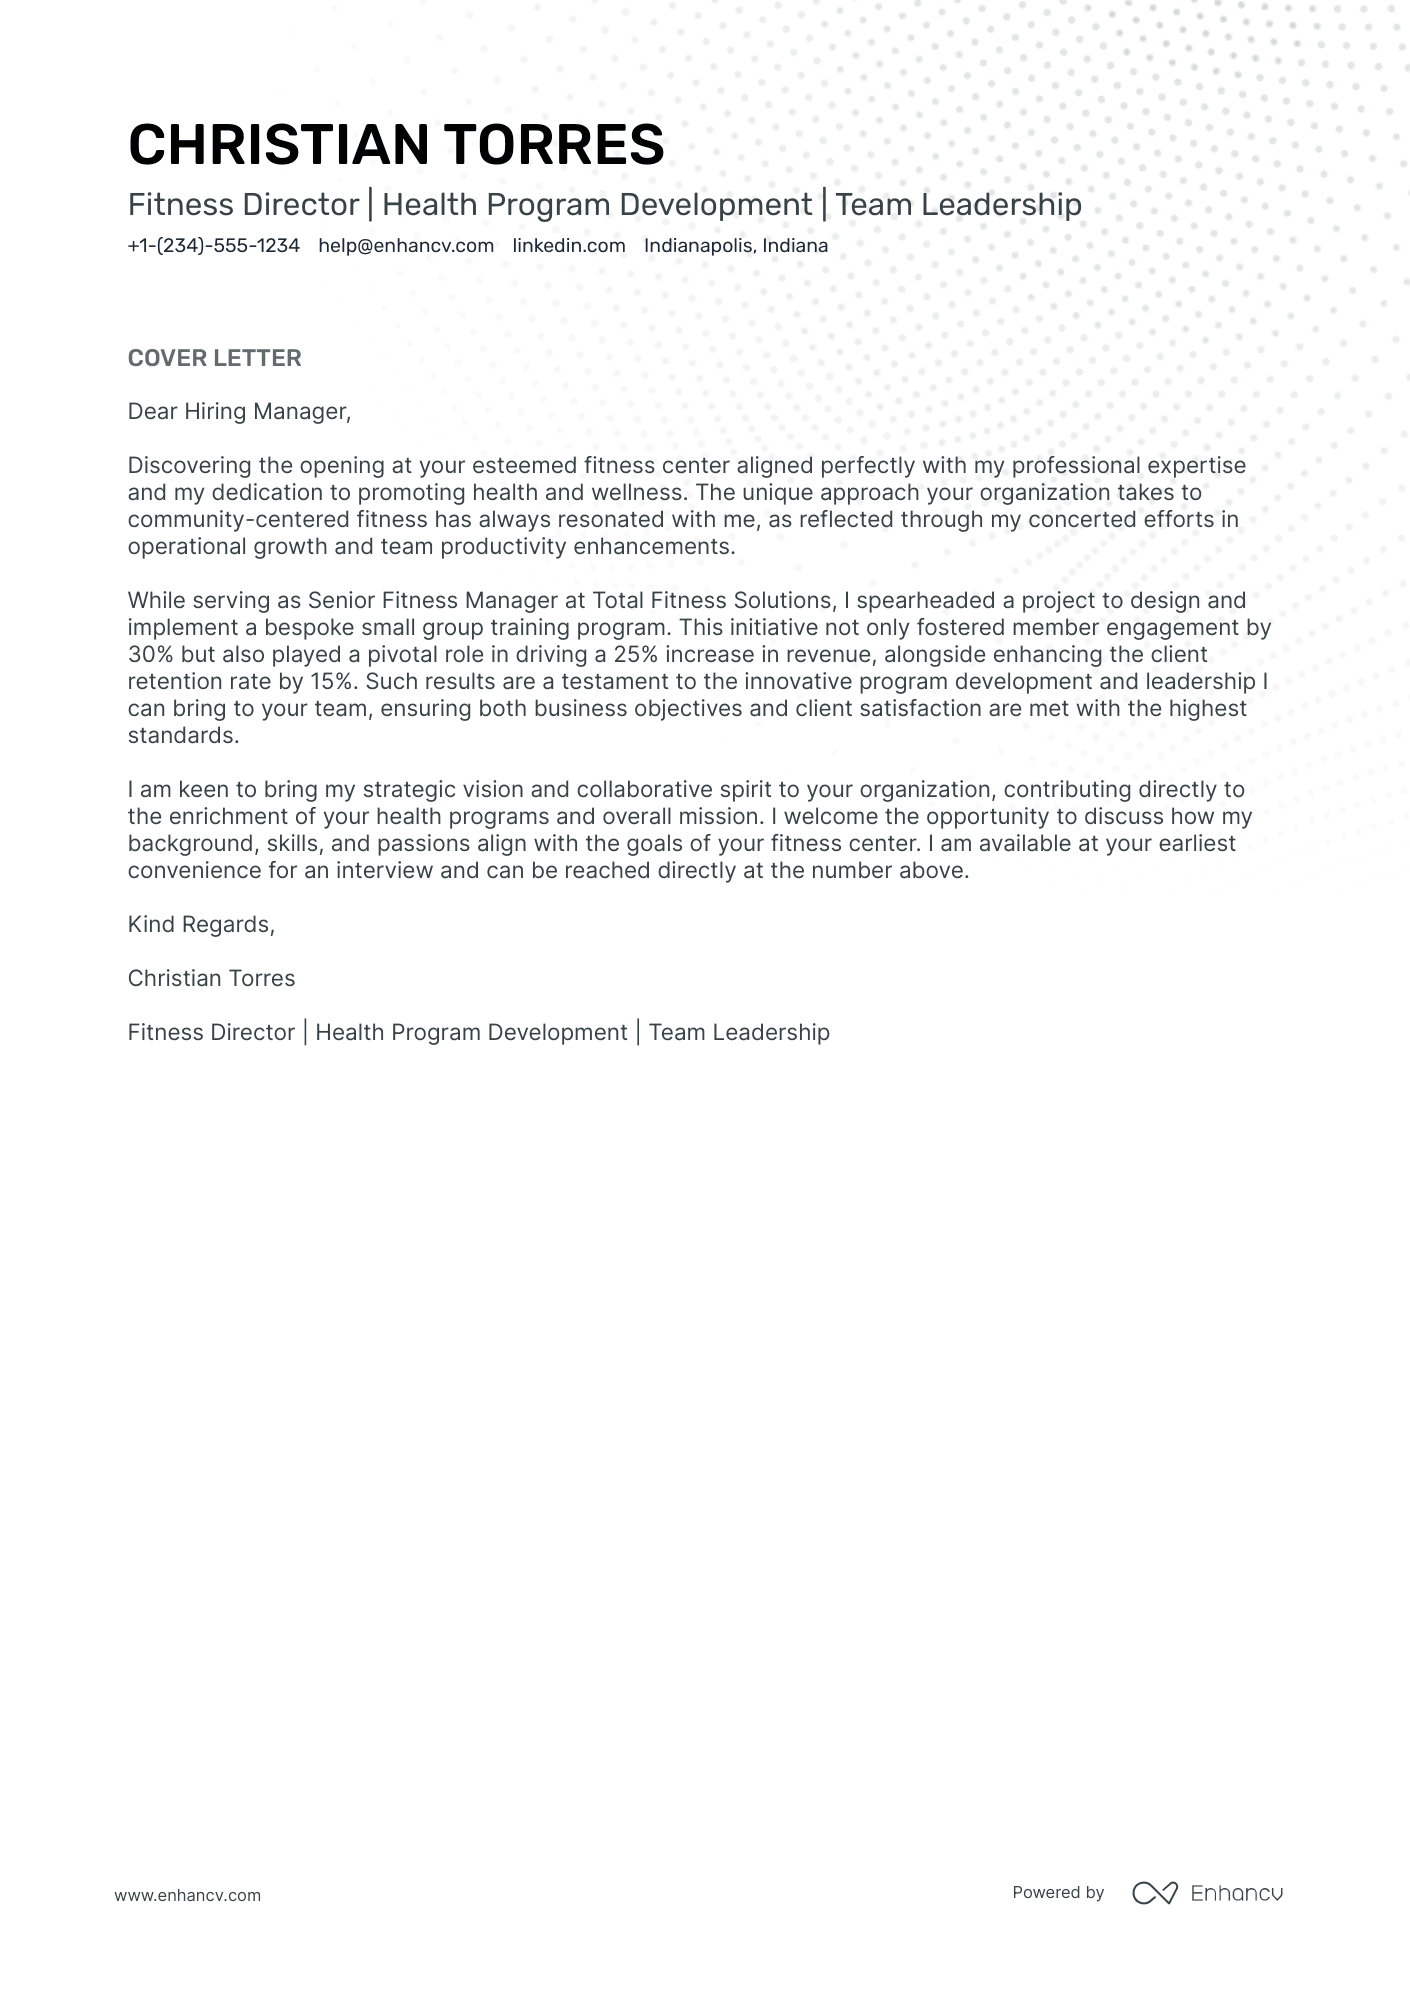 Fitness Director cover letter